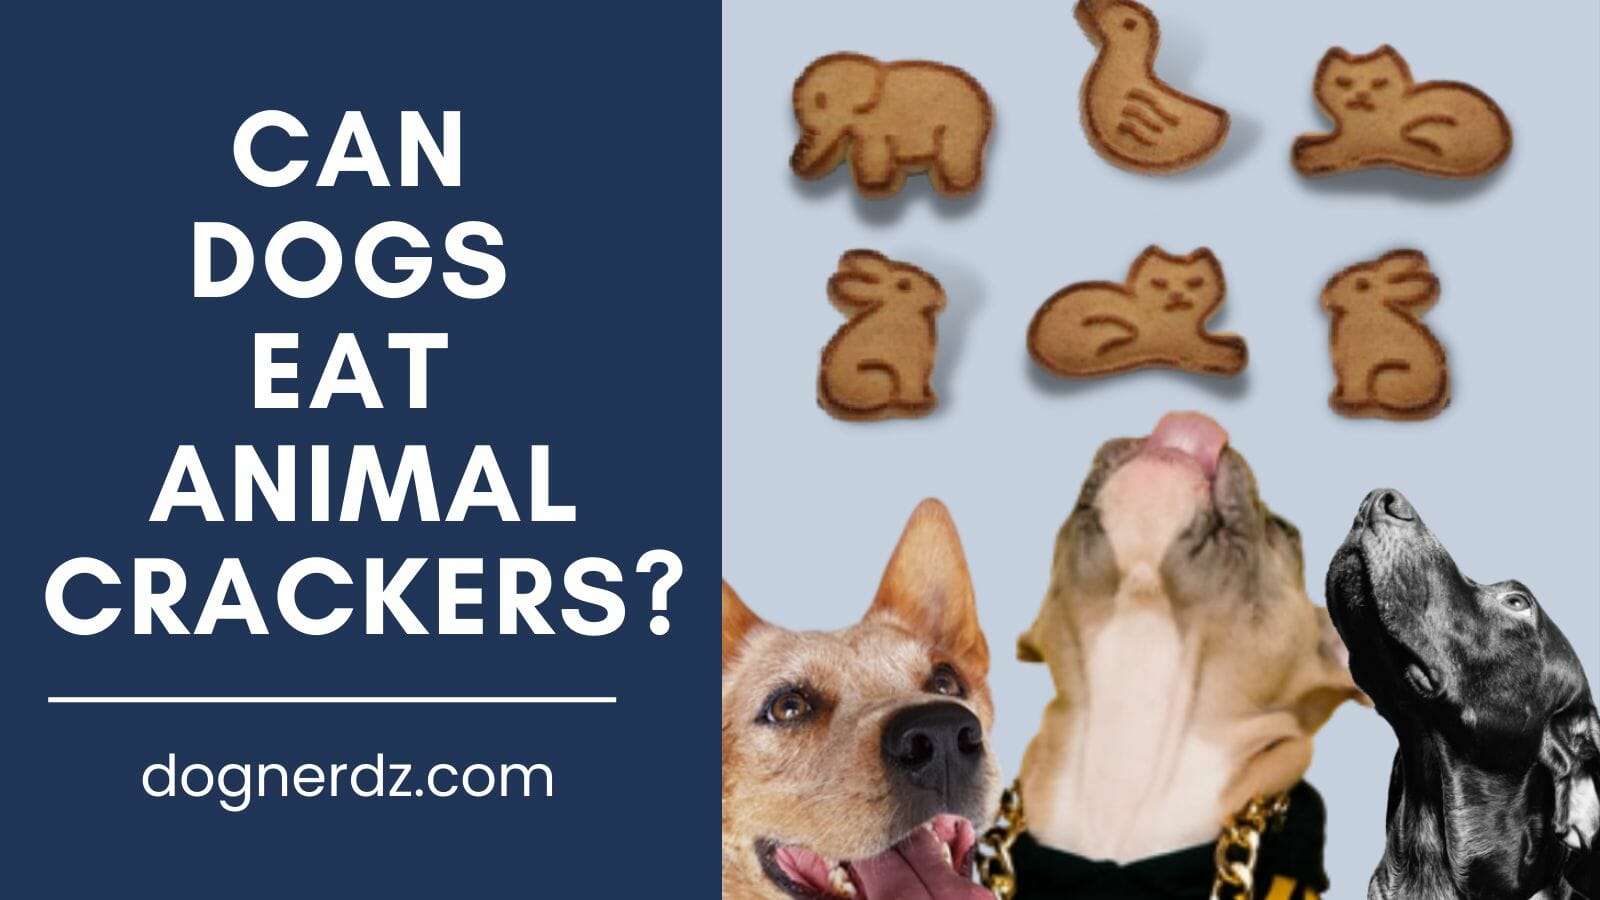 can dogs eat animal crackers?